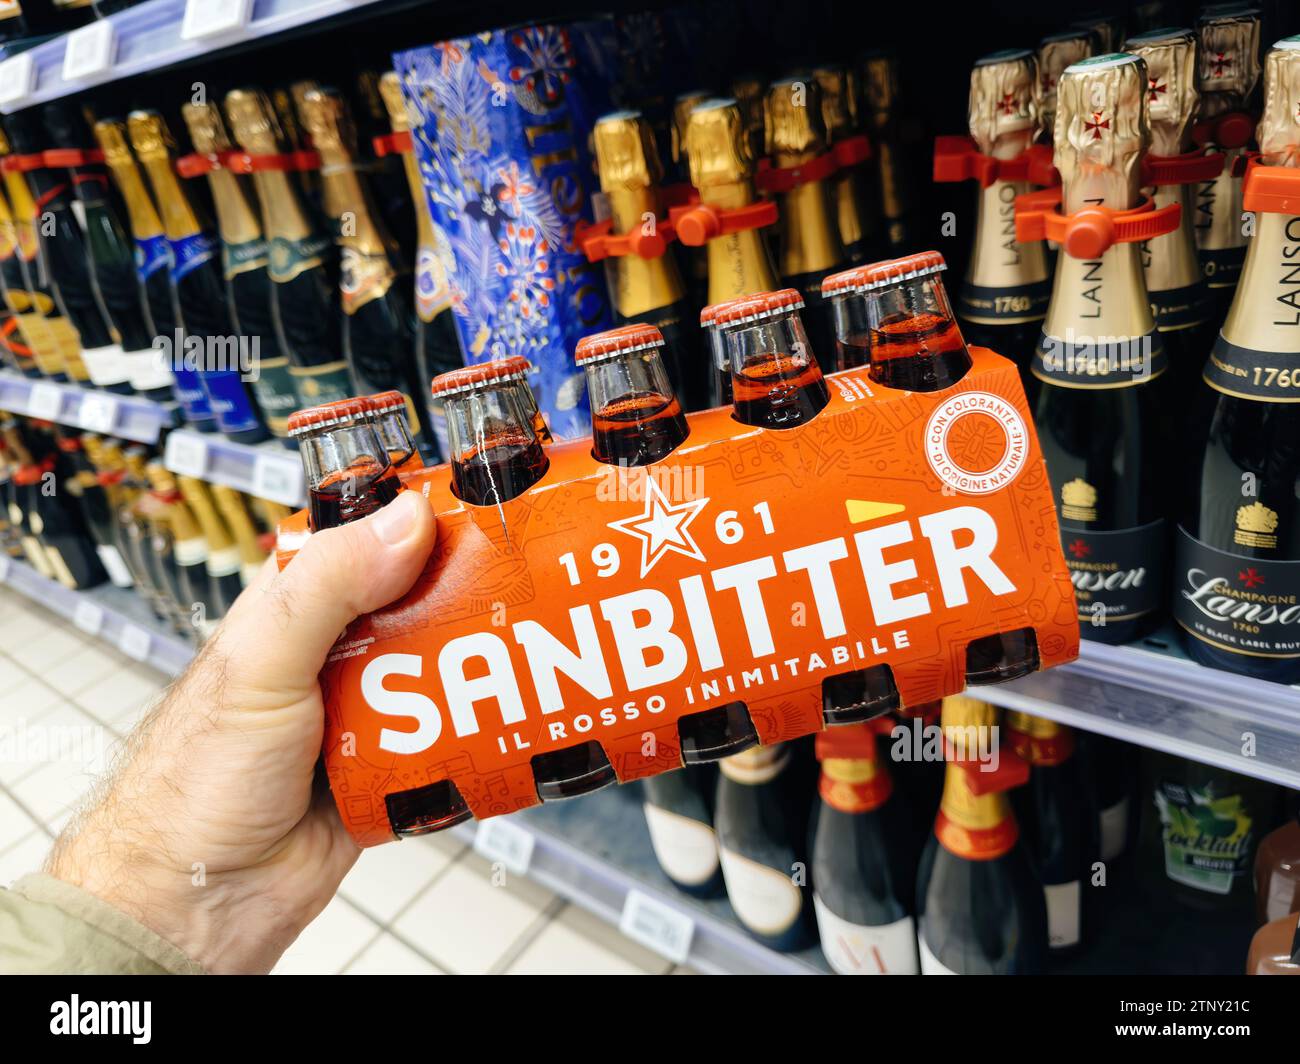 Paris, France - Nov 10, 2023: A male hand delicately holds a package of Sanbitter 1961 Il Rosso, the inimitable digestive, in a French supermarket Stock Photo